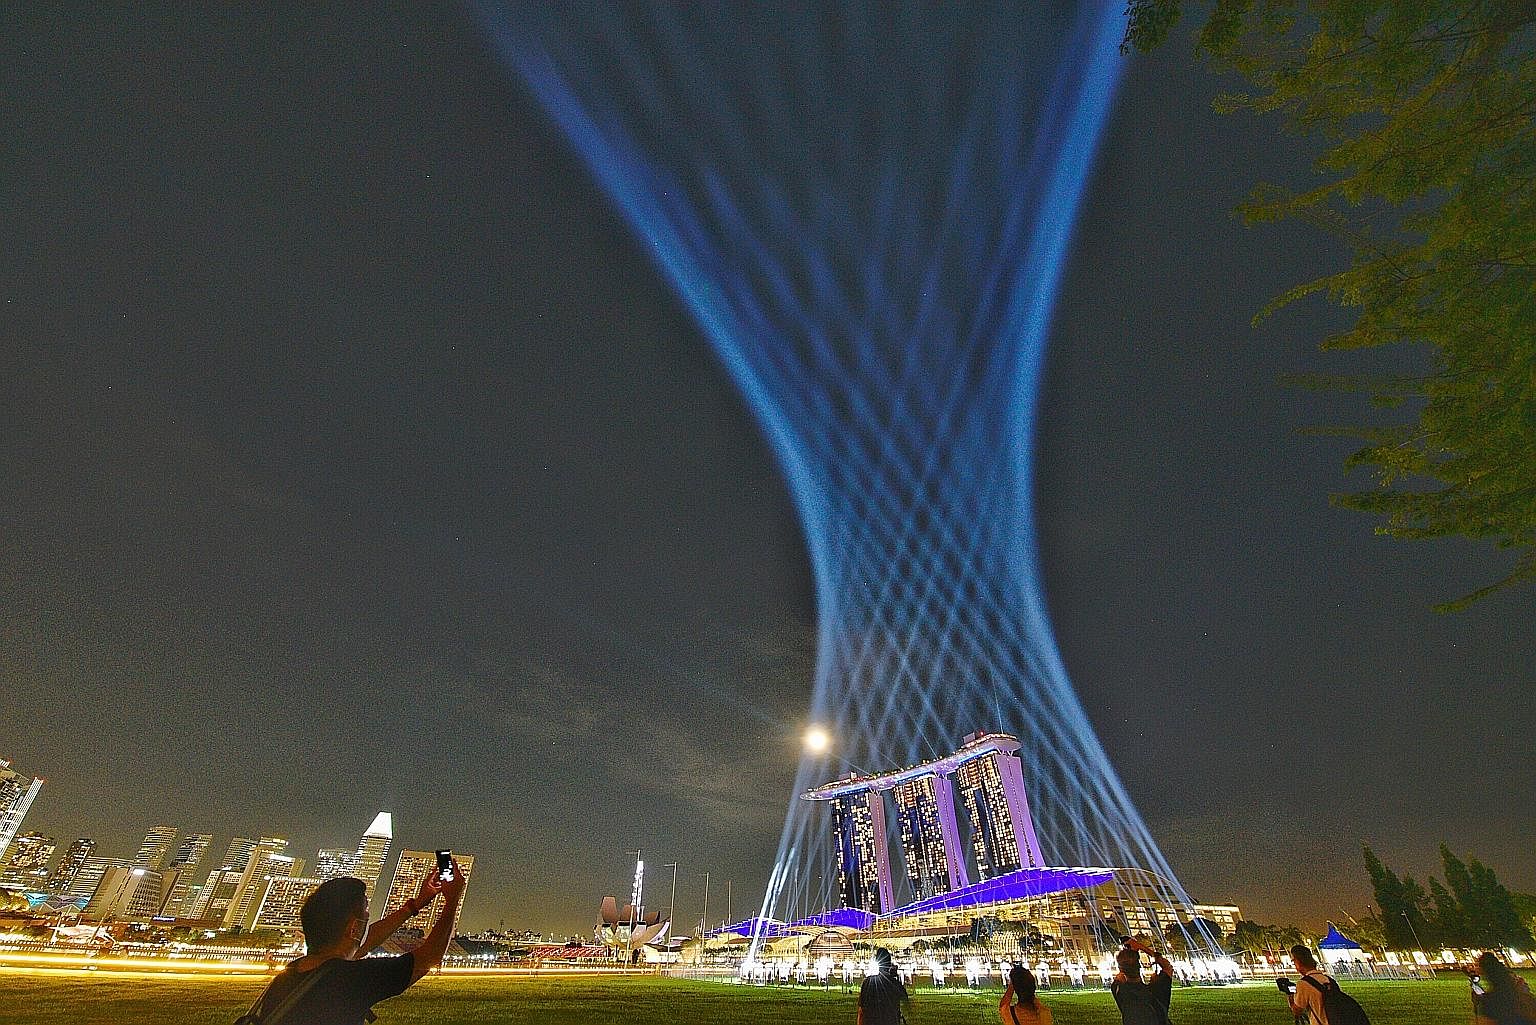 Visitors at the Shine a Light display at The Promontory yesterday, with Marina Bay Sands in the background. The display is part of the year-end celebrations, which are expected to be muted, given the Covid-19 pandemic. The light display is created by